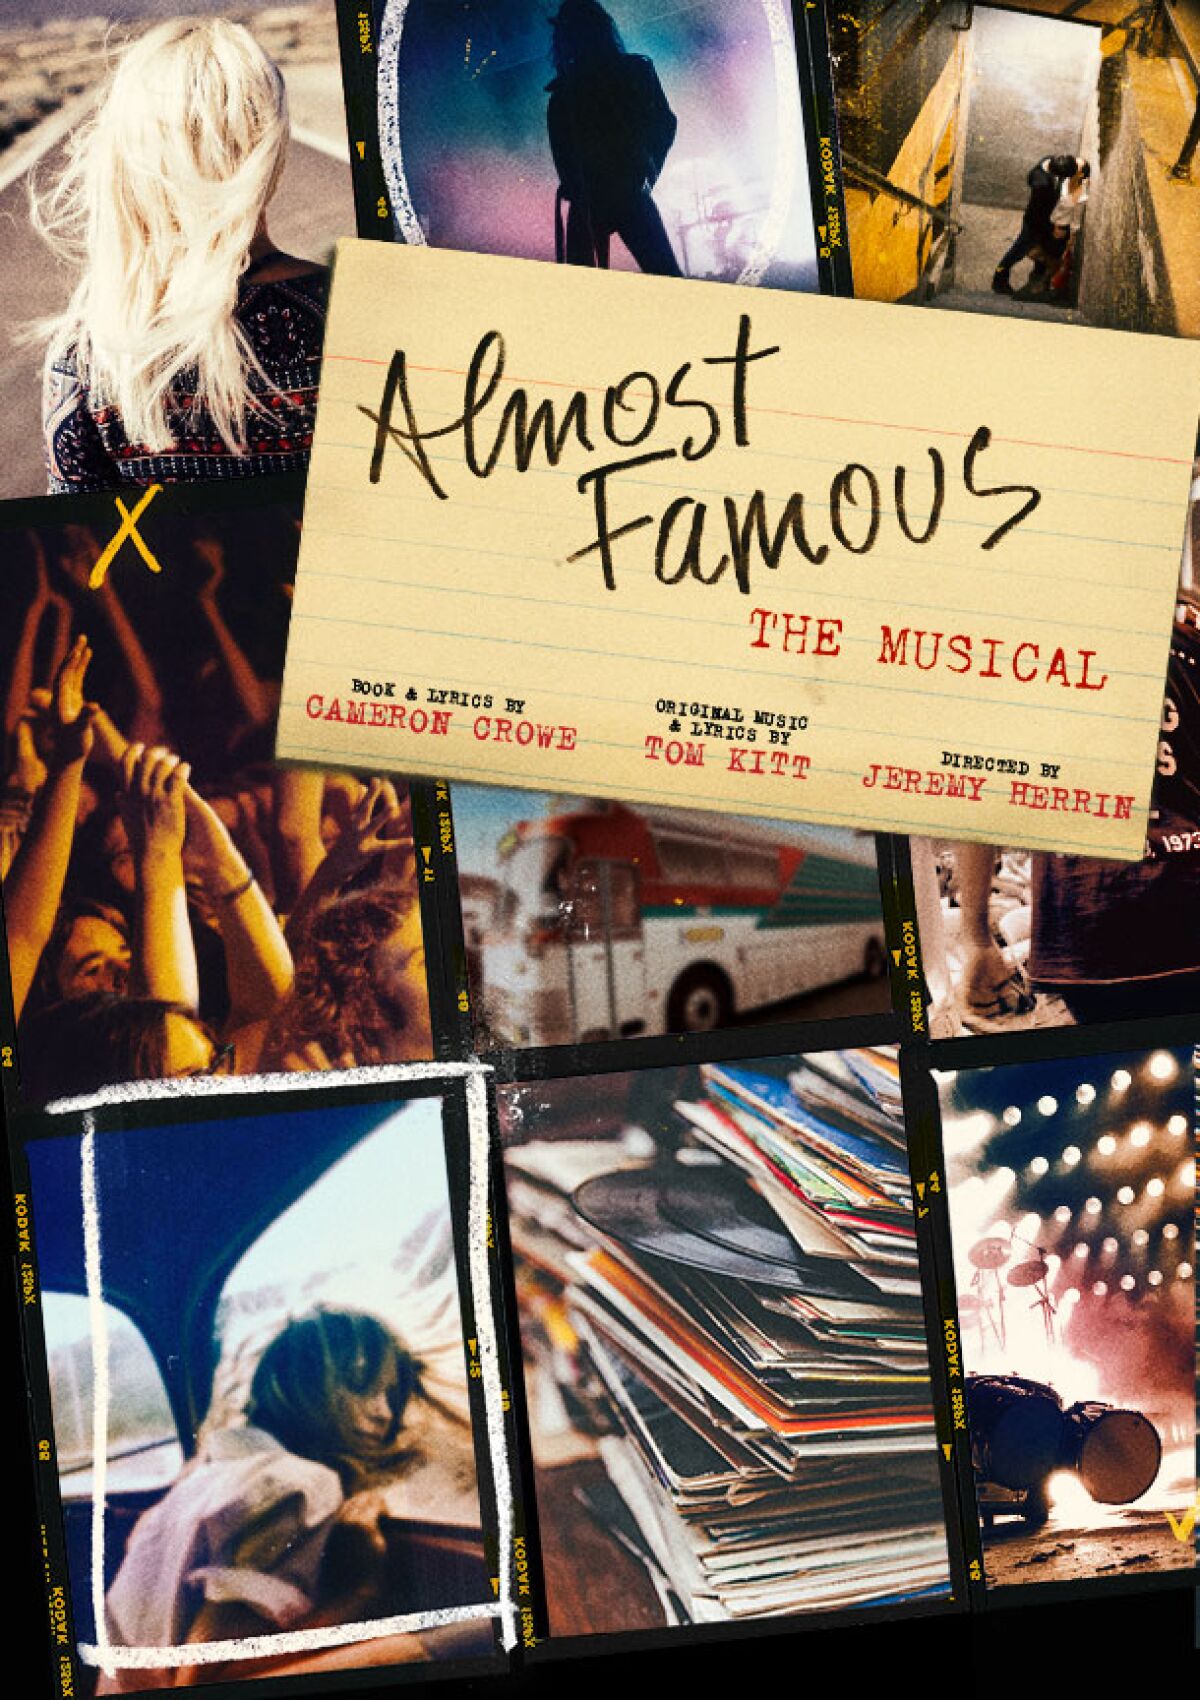 A photo of 'Almost Famous'